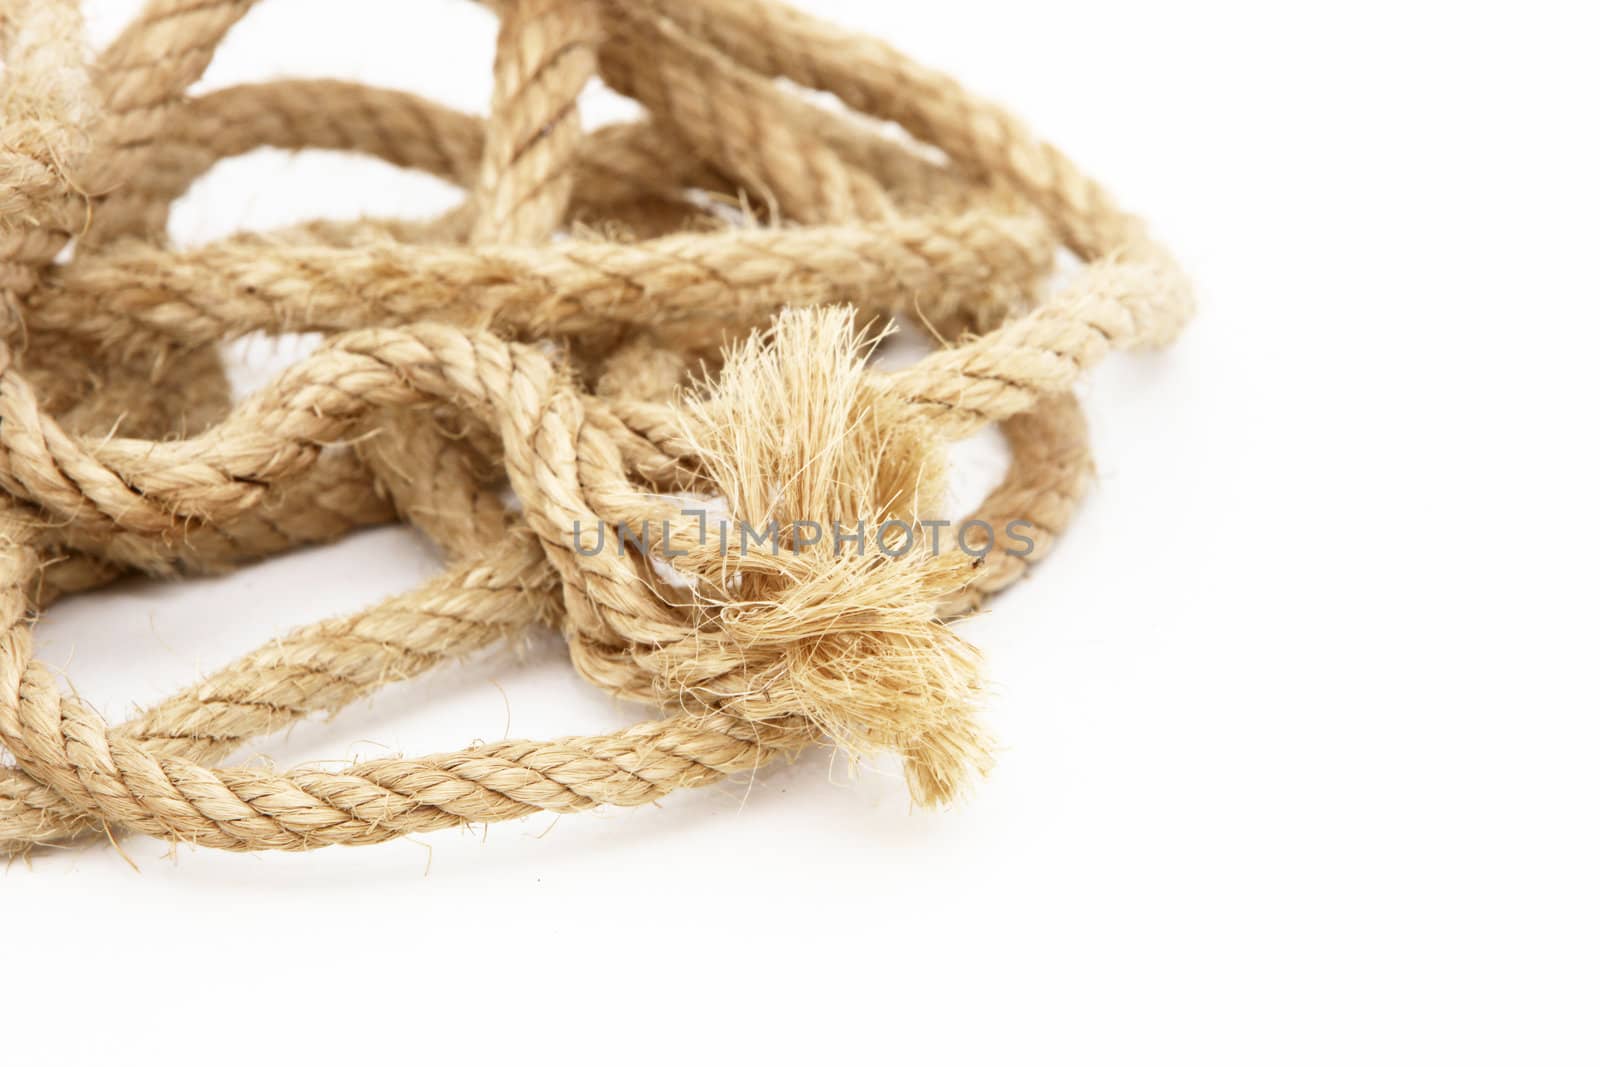 Coiled household rope with a frayed unravelled end and fibre texture on a white background